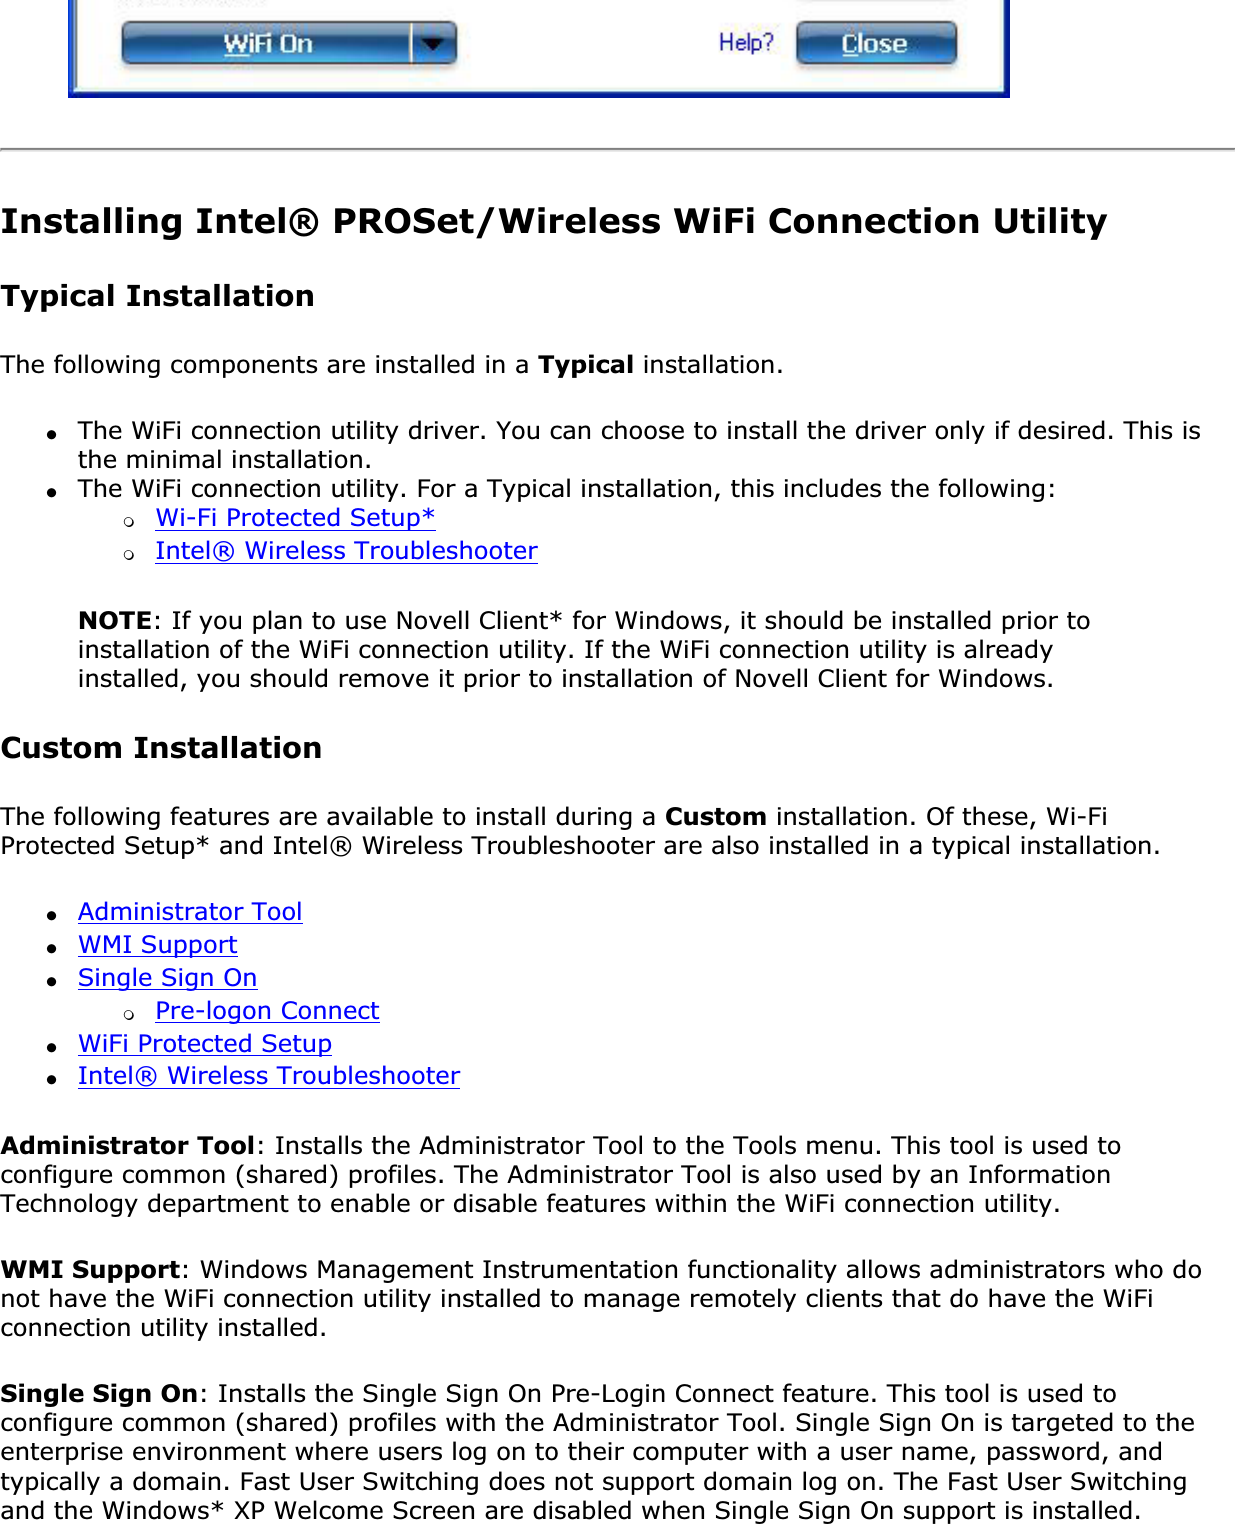 Installing Intel® PROSet/Wireless WiFi Connection UtilityTypical Installation The following components are installed in a Typical installation.●The WiFi connection utility driver. You can choose to install the driver only if desired. This is the minimal installation.●The WiFi connection utility. For a Typical installation, this includes the following: ❍Wi-Fi Protected Setup*❍Intel® Wireless TroubleshooterNOTE: If you plan to use Novell Client* for Windows, it should be installed prior to installation of the WiFi connection utility. If the WiFi connection utility is already installed, you should remove it prior to installation of Novell Client for Windows.Custom Installation The following features are available to install during a Custom installation. Of these, Wi-Fi Protected Setup* and Intel® Wireless Troubleshooter are also installed in a typical installation.●Administrator Tool●WMI Support●Single Sign On❍Pre-logon Connect●WiFi Protected Setup●Intel® Wireless TroubleshooterAdministrator Tool: Installs the Administrator Tool to the Tools menu. This tool is used to configure common (shared) profiles. The Administrator Tool is also used by an Information Technology department to enable or disable features within the WiFi connection utility.WMI Support: Windows Management Instrumentation functionality allows administrators who do not have the WiFi connection utility installed to manage remotely clients that do have the WiFi connection utility installed.Single Sign On: Installs the Single Sign On Pre-Login Connect feature. This tool is used to configure common (shared) profiles with the Administrator Tool. Single Sign On is targeted to the enterprise environment where users log on to their computer with a user name, password, and typically a domain. Fast User Switching does not support domain log on. The Fast User Switching and the Windows* XP Welcome Screen are disabled when Single Sign On support is installed.